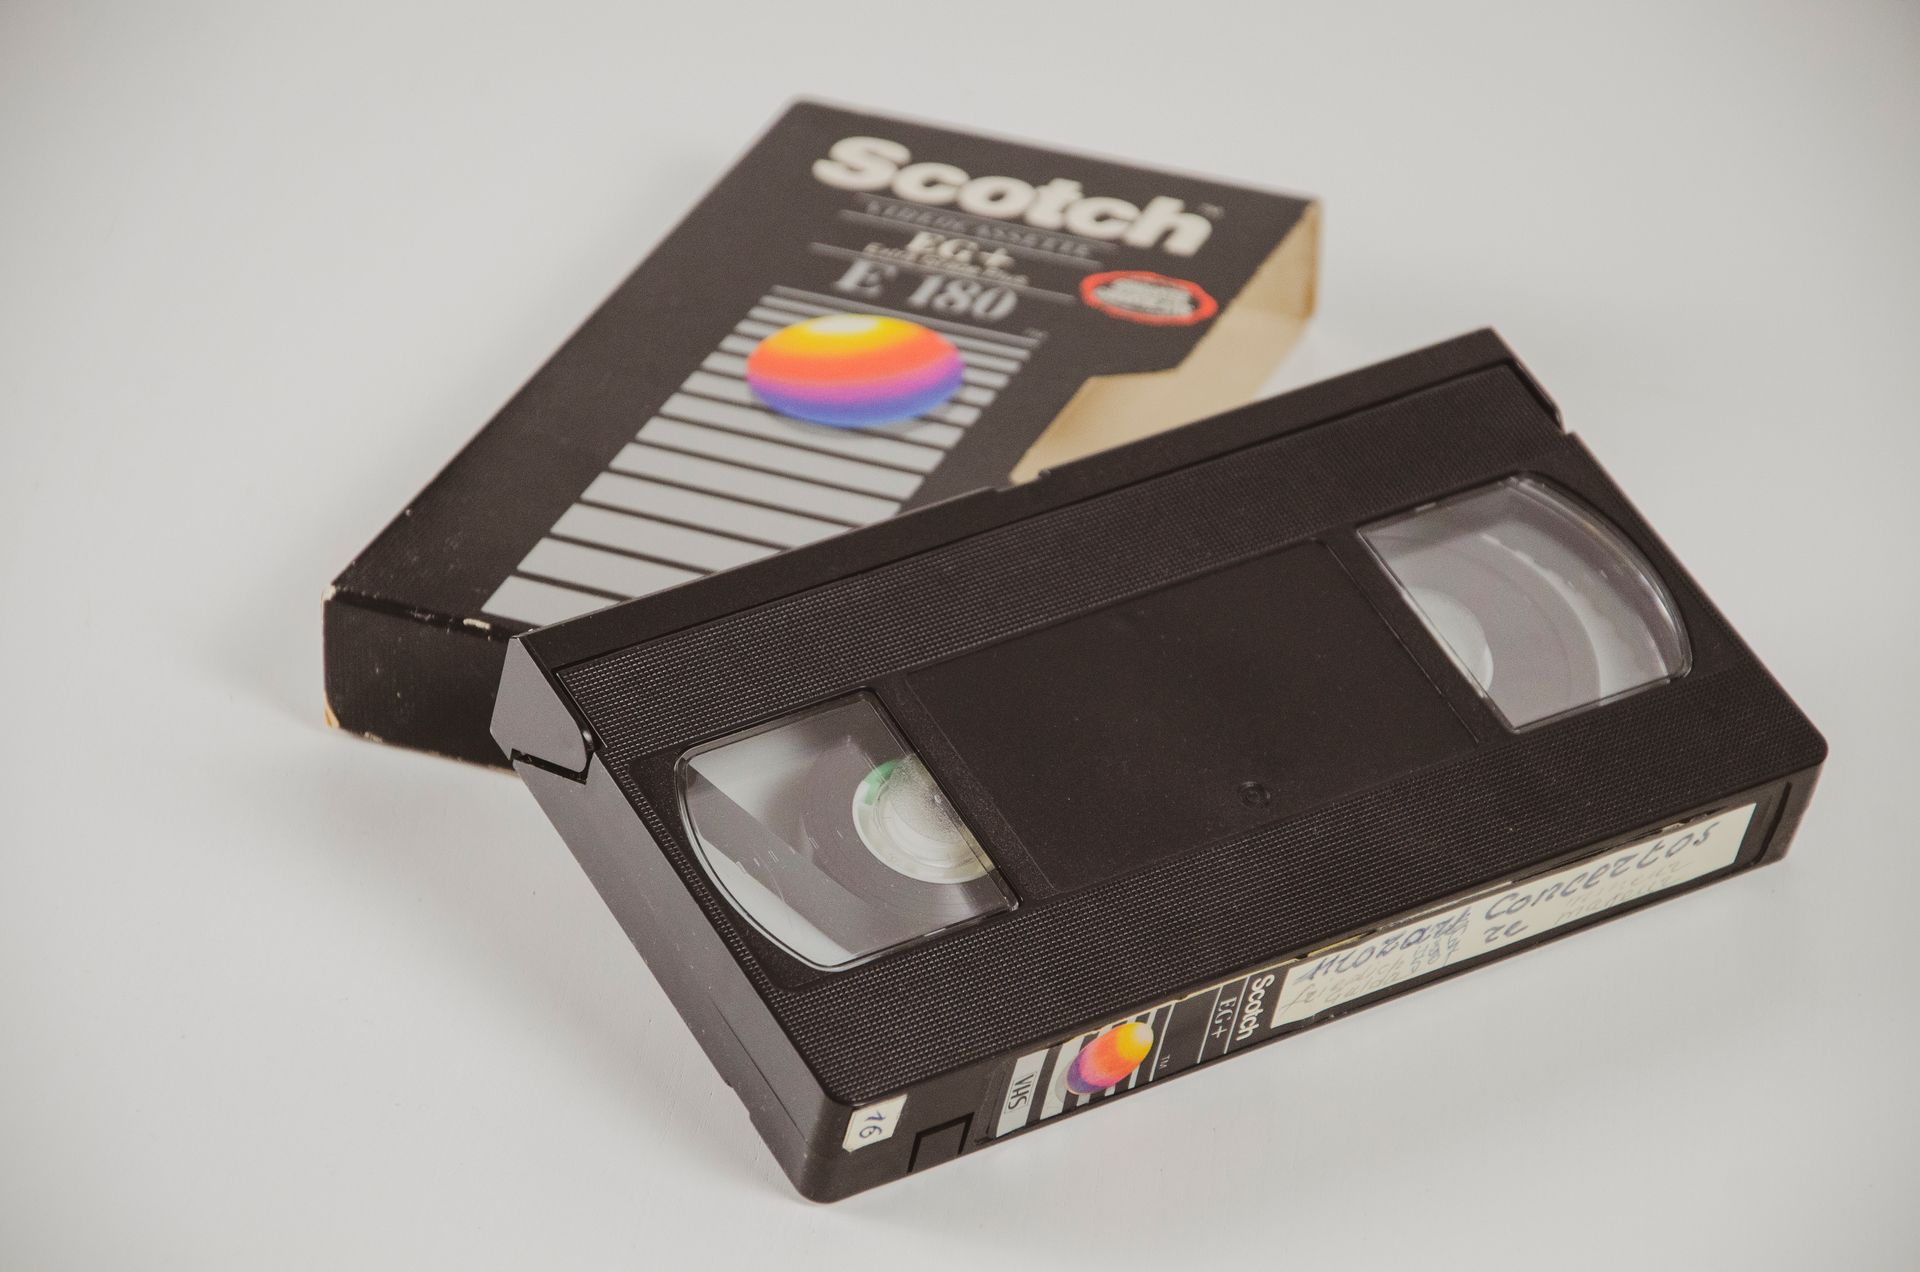 An old VHS tape with a box